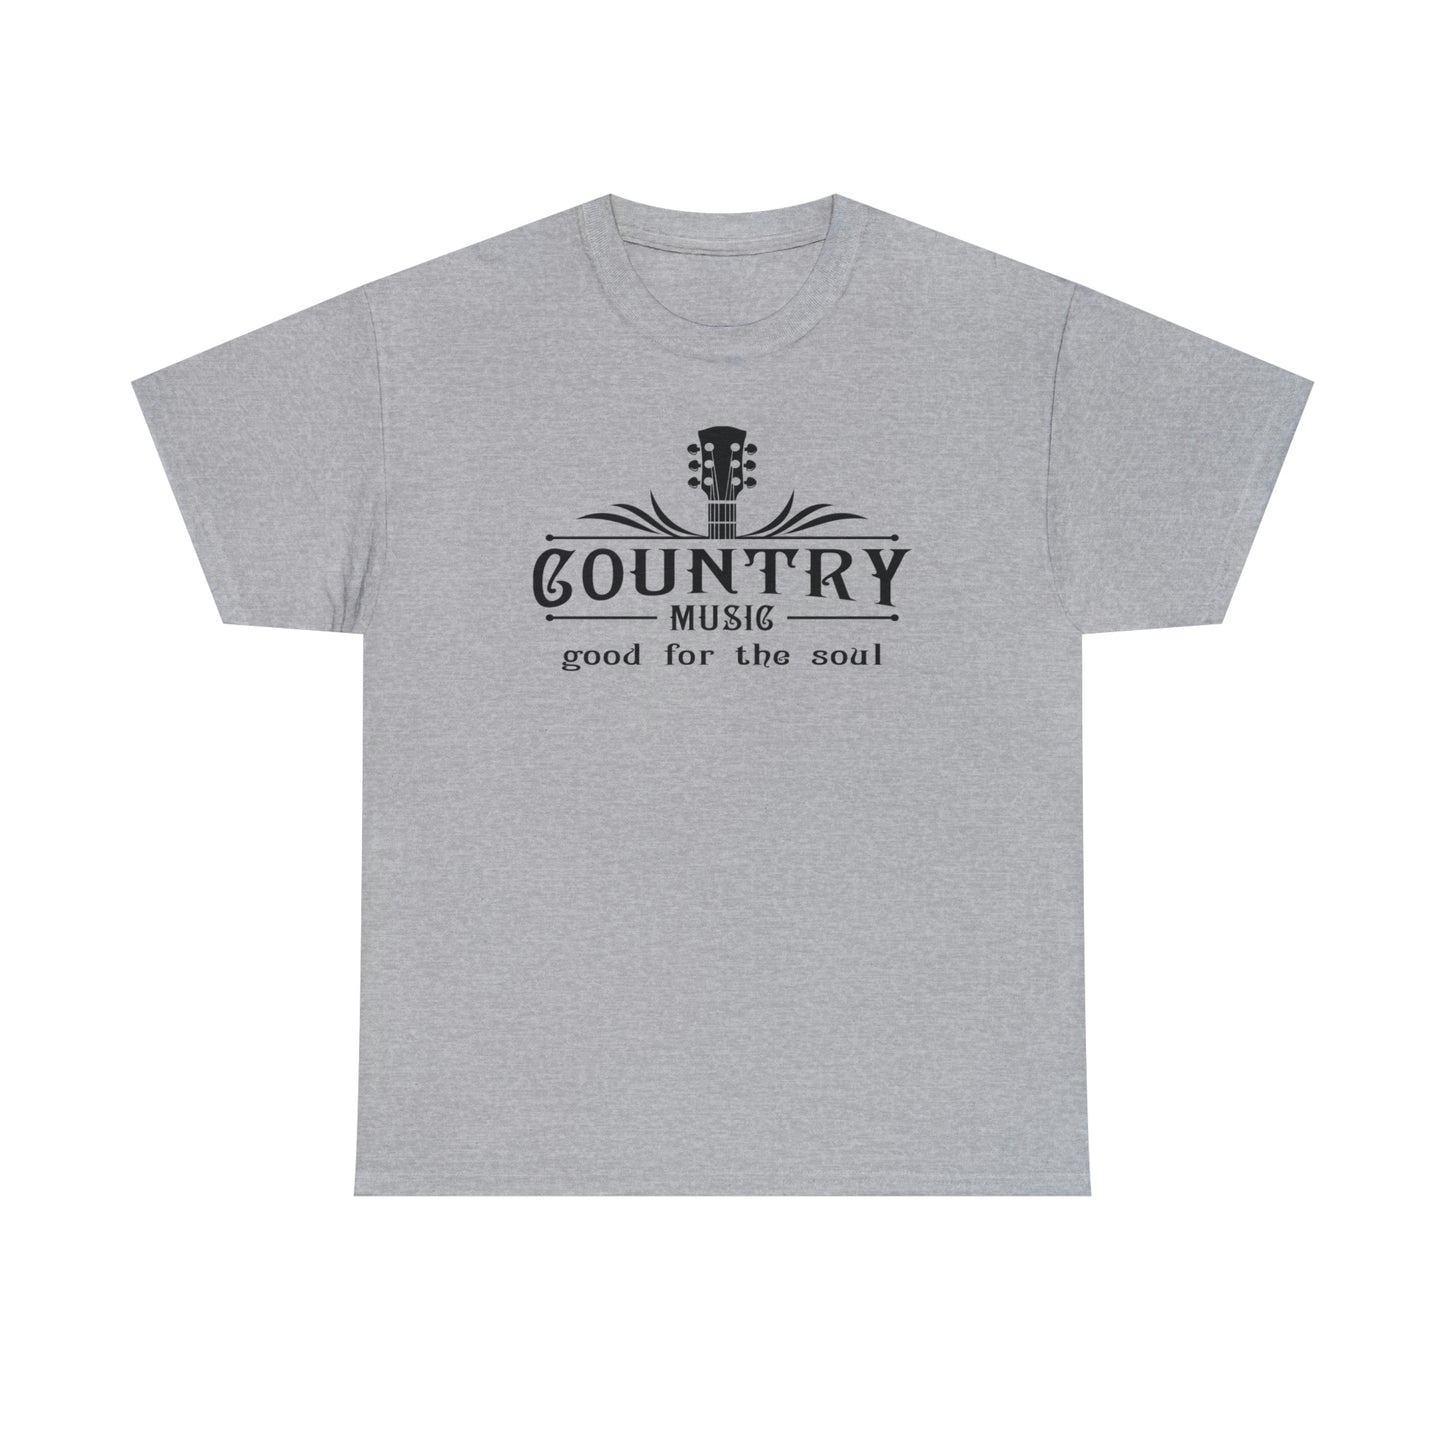 Country Music T-Shirt Western T Shirt For Cowboy TShirt For Boot Scootin' Shirt For Country Shirt For Country Music Gift